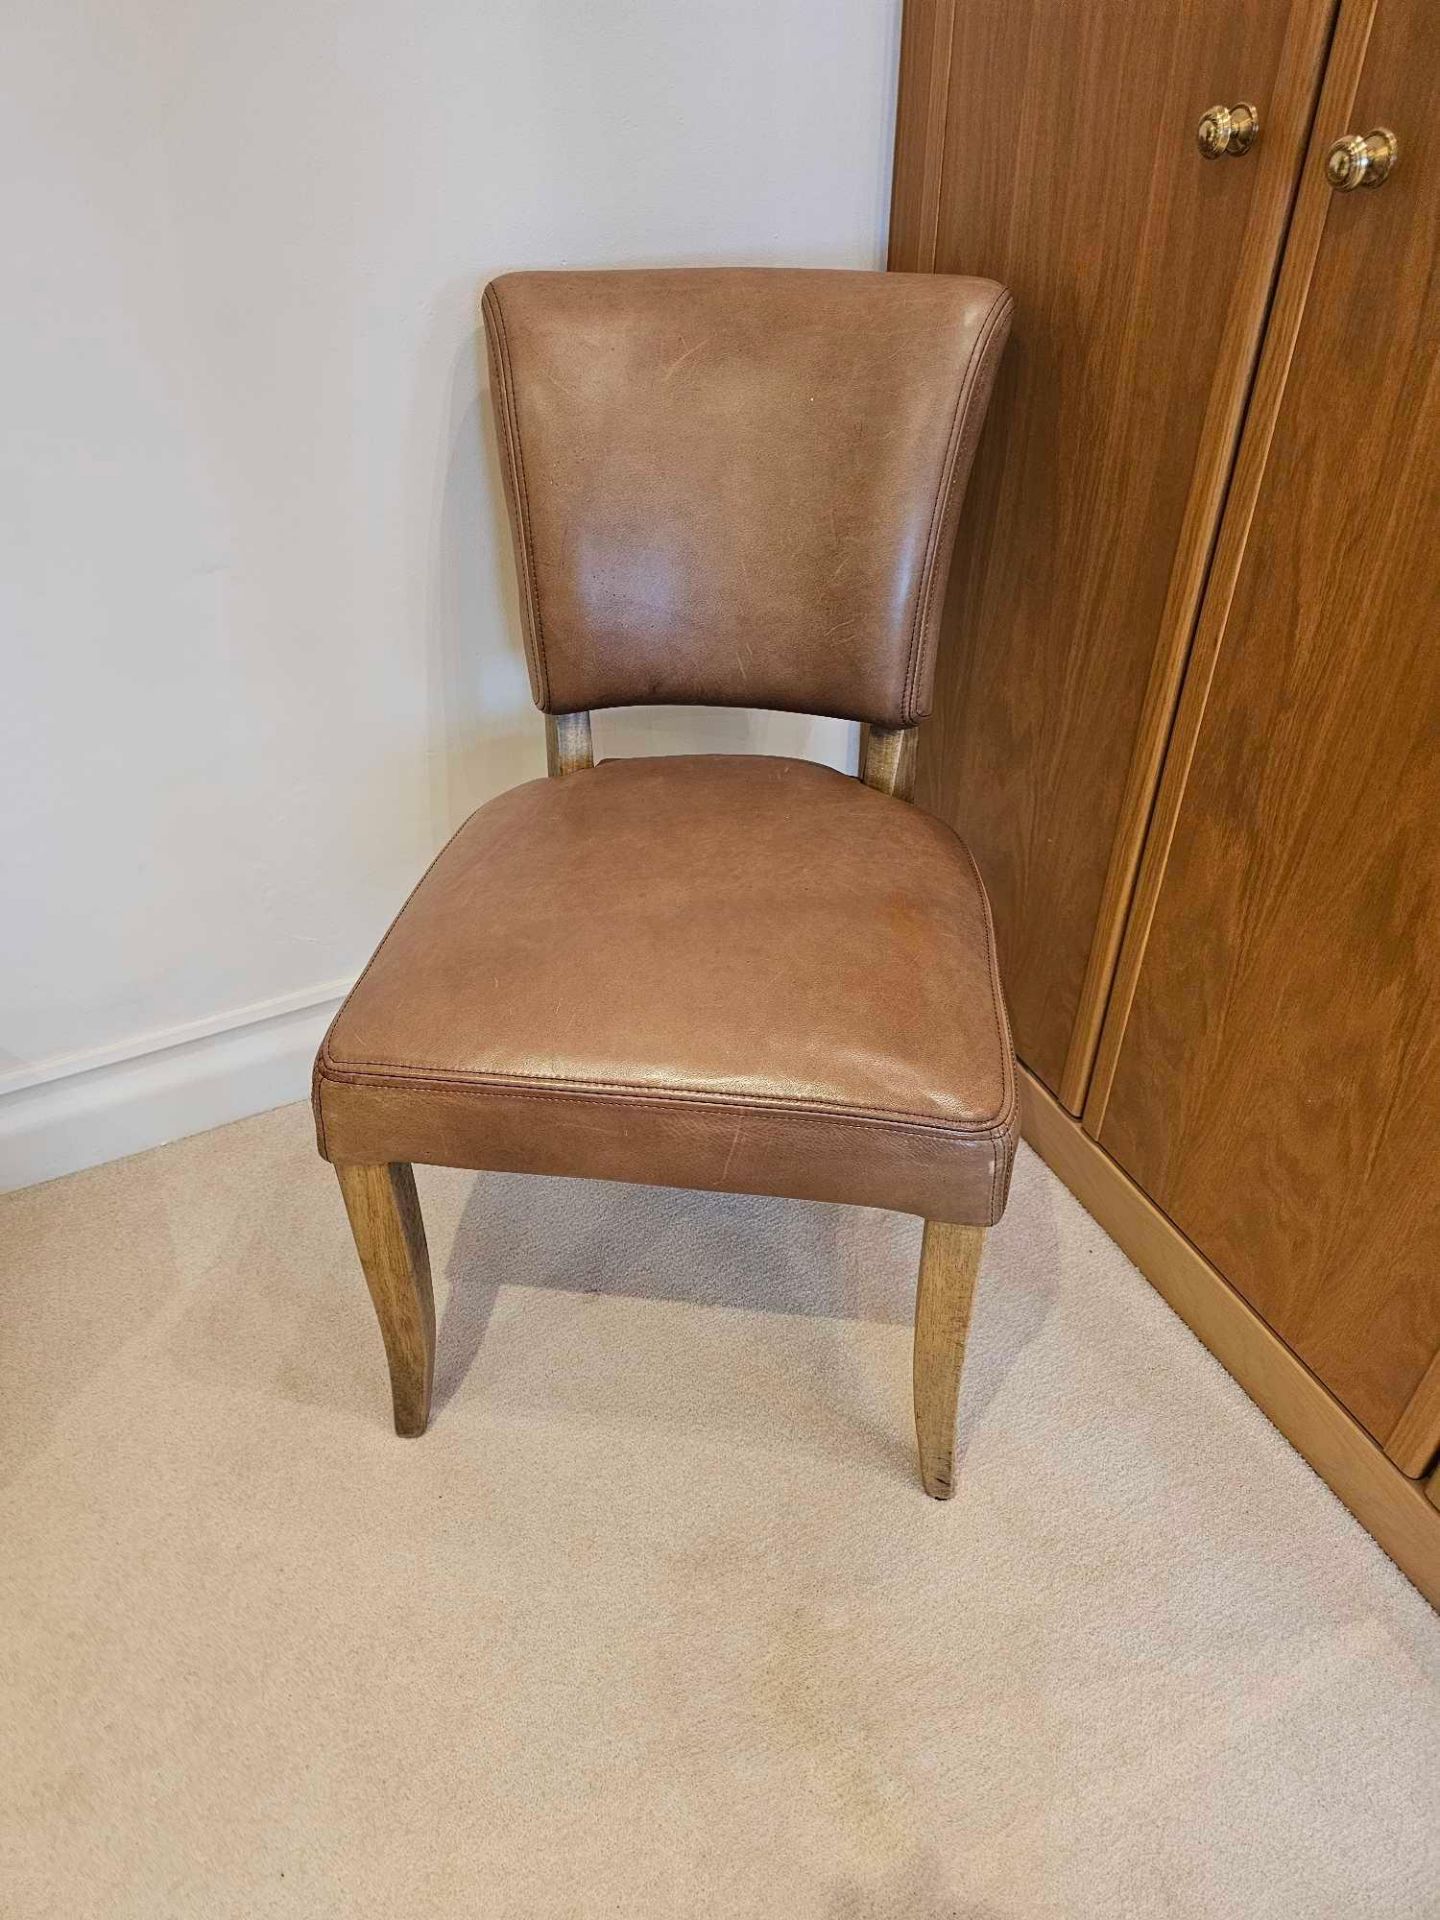 Timothy Oulton Mimi Brown Leather Studded Side Chair With Weathered Oak Legs Seat Height: 51cm